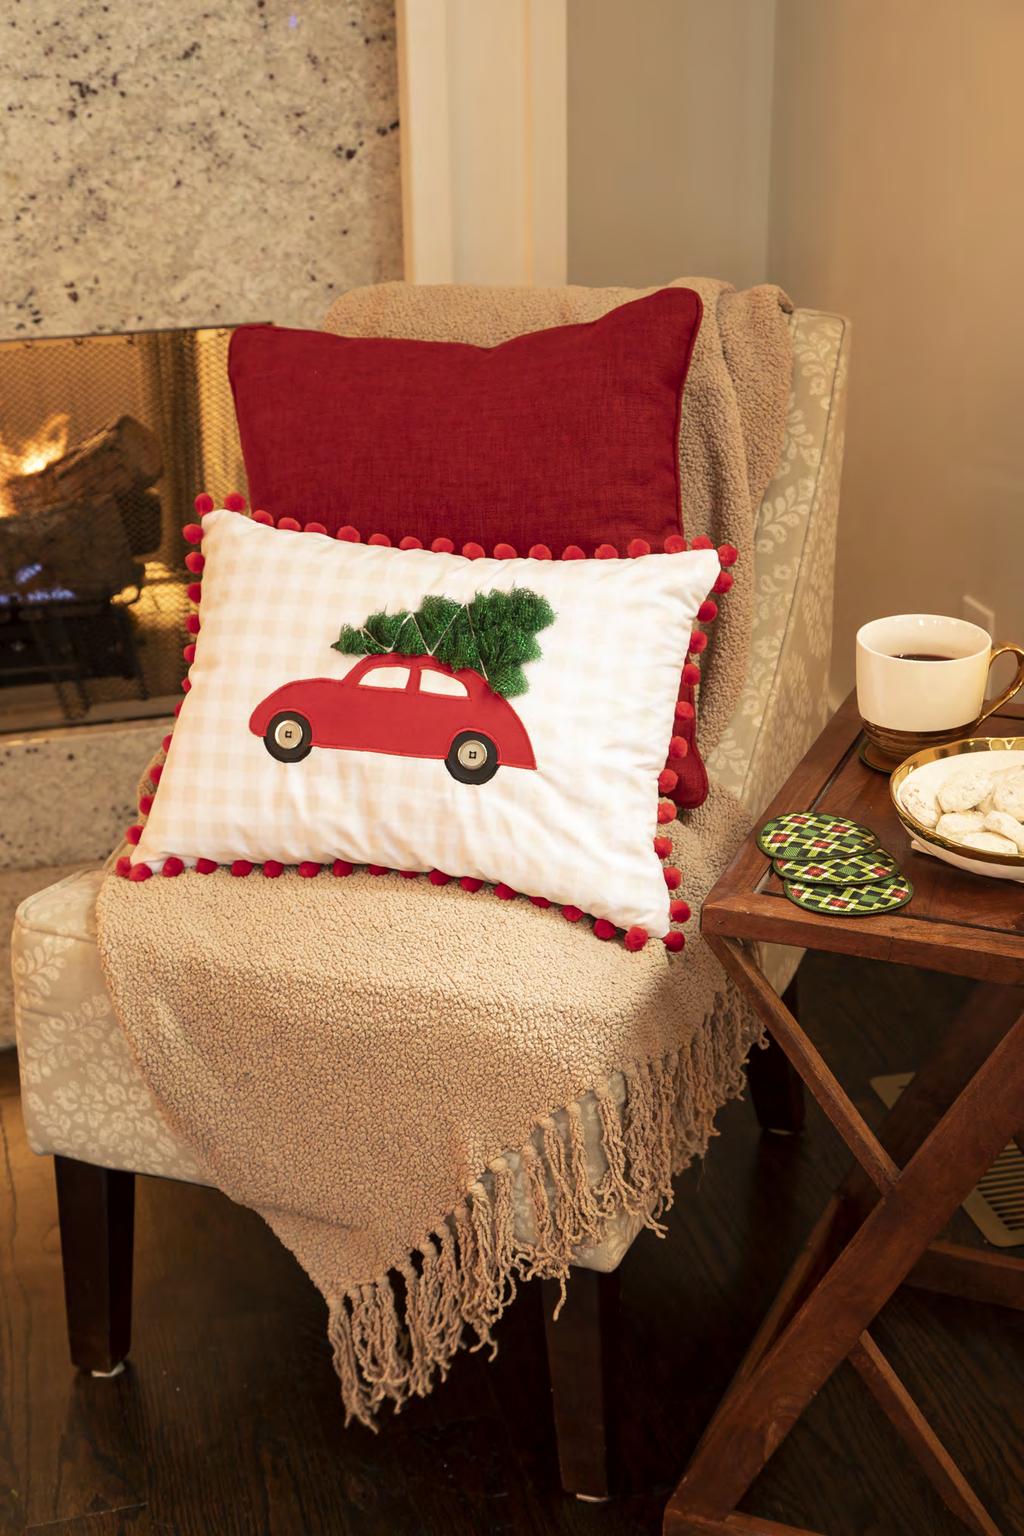 Retro Pop-Up Pine Pillow Give your holiday décor some retro flair with this retro pop-up pine pillow.